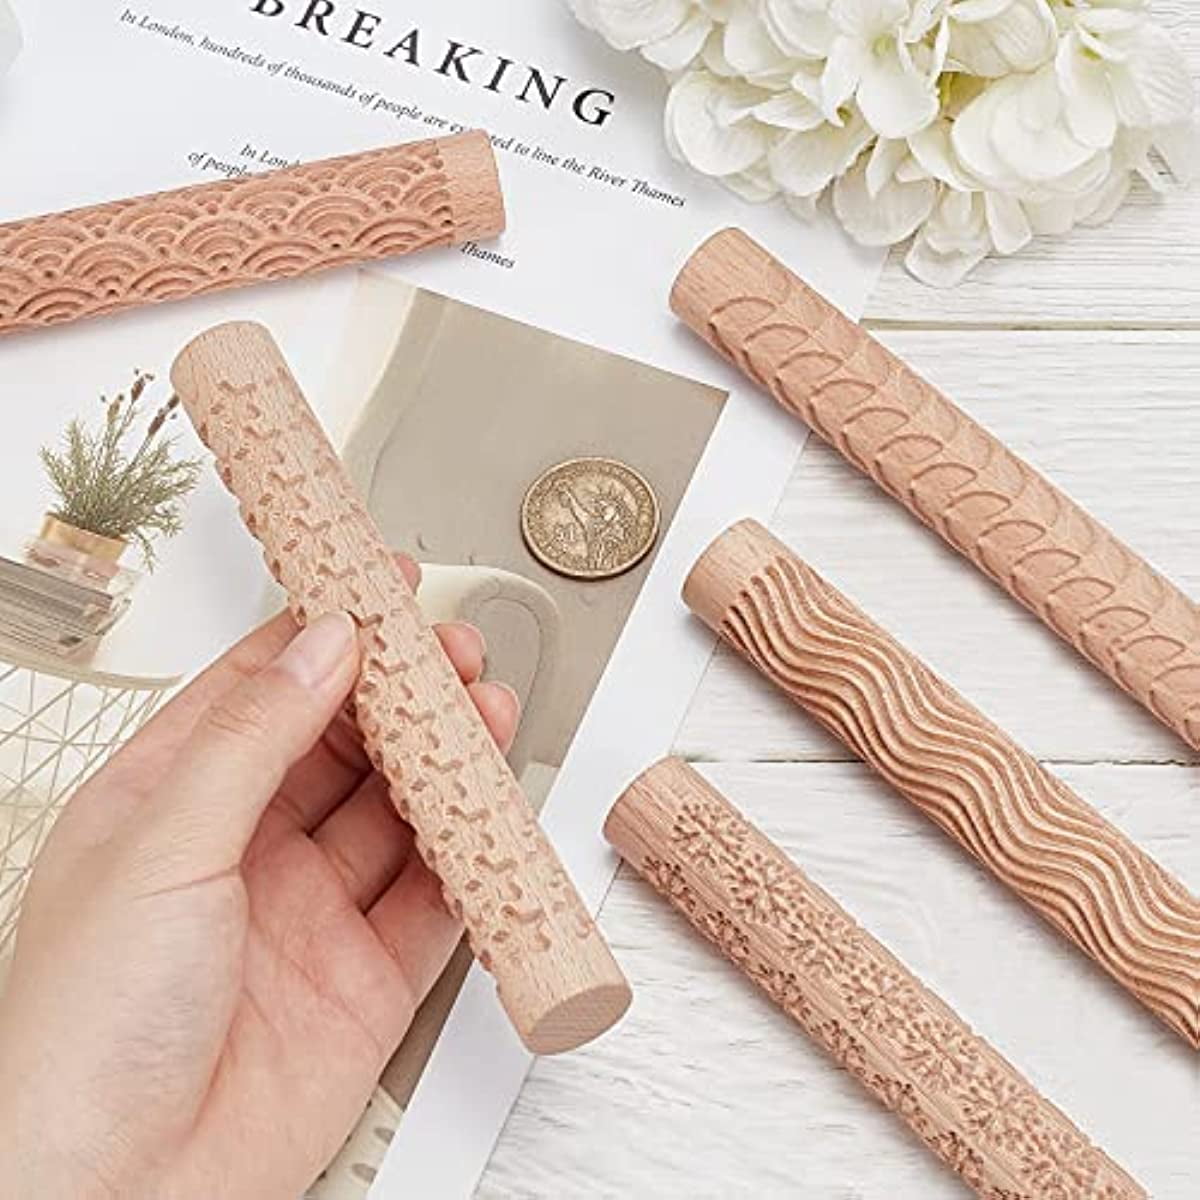 6 Piece Clay Rolling Pin Textured Hand Roller Wooden Handle Pottery Tools  Set Durable Easy To